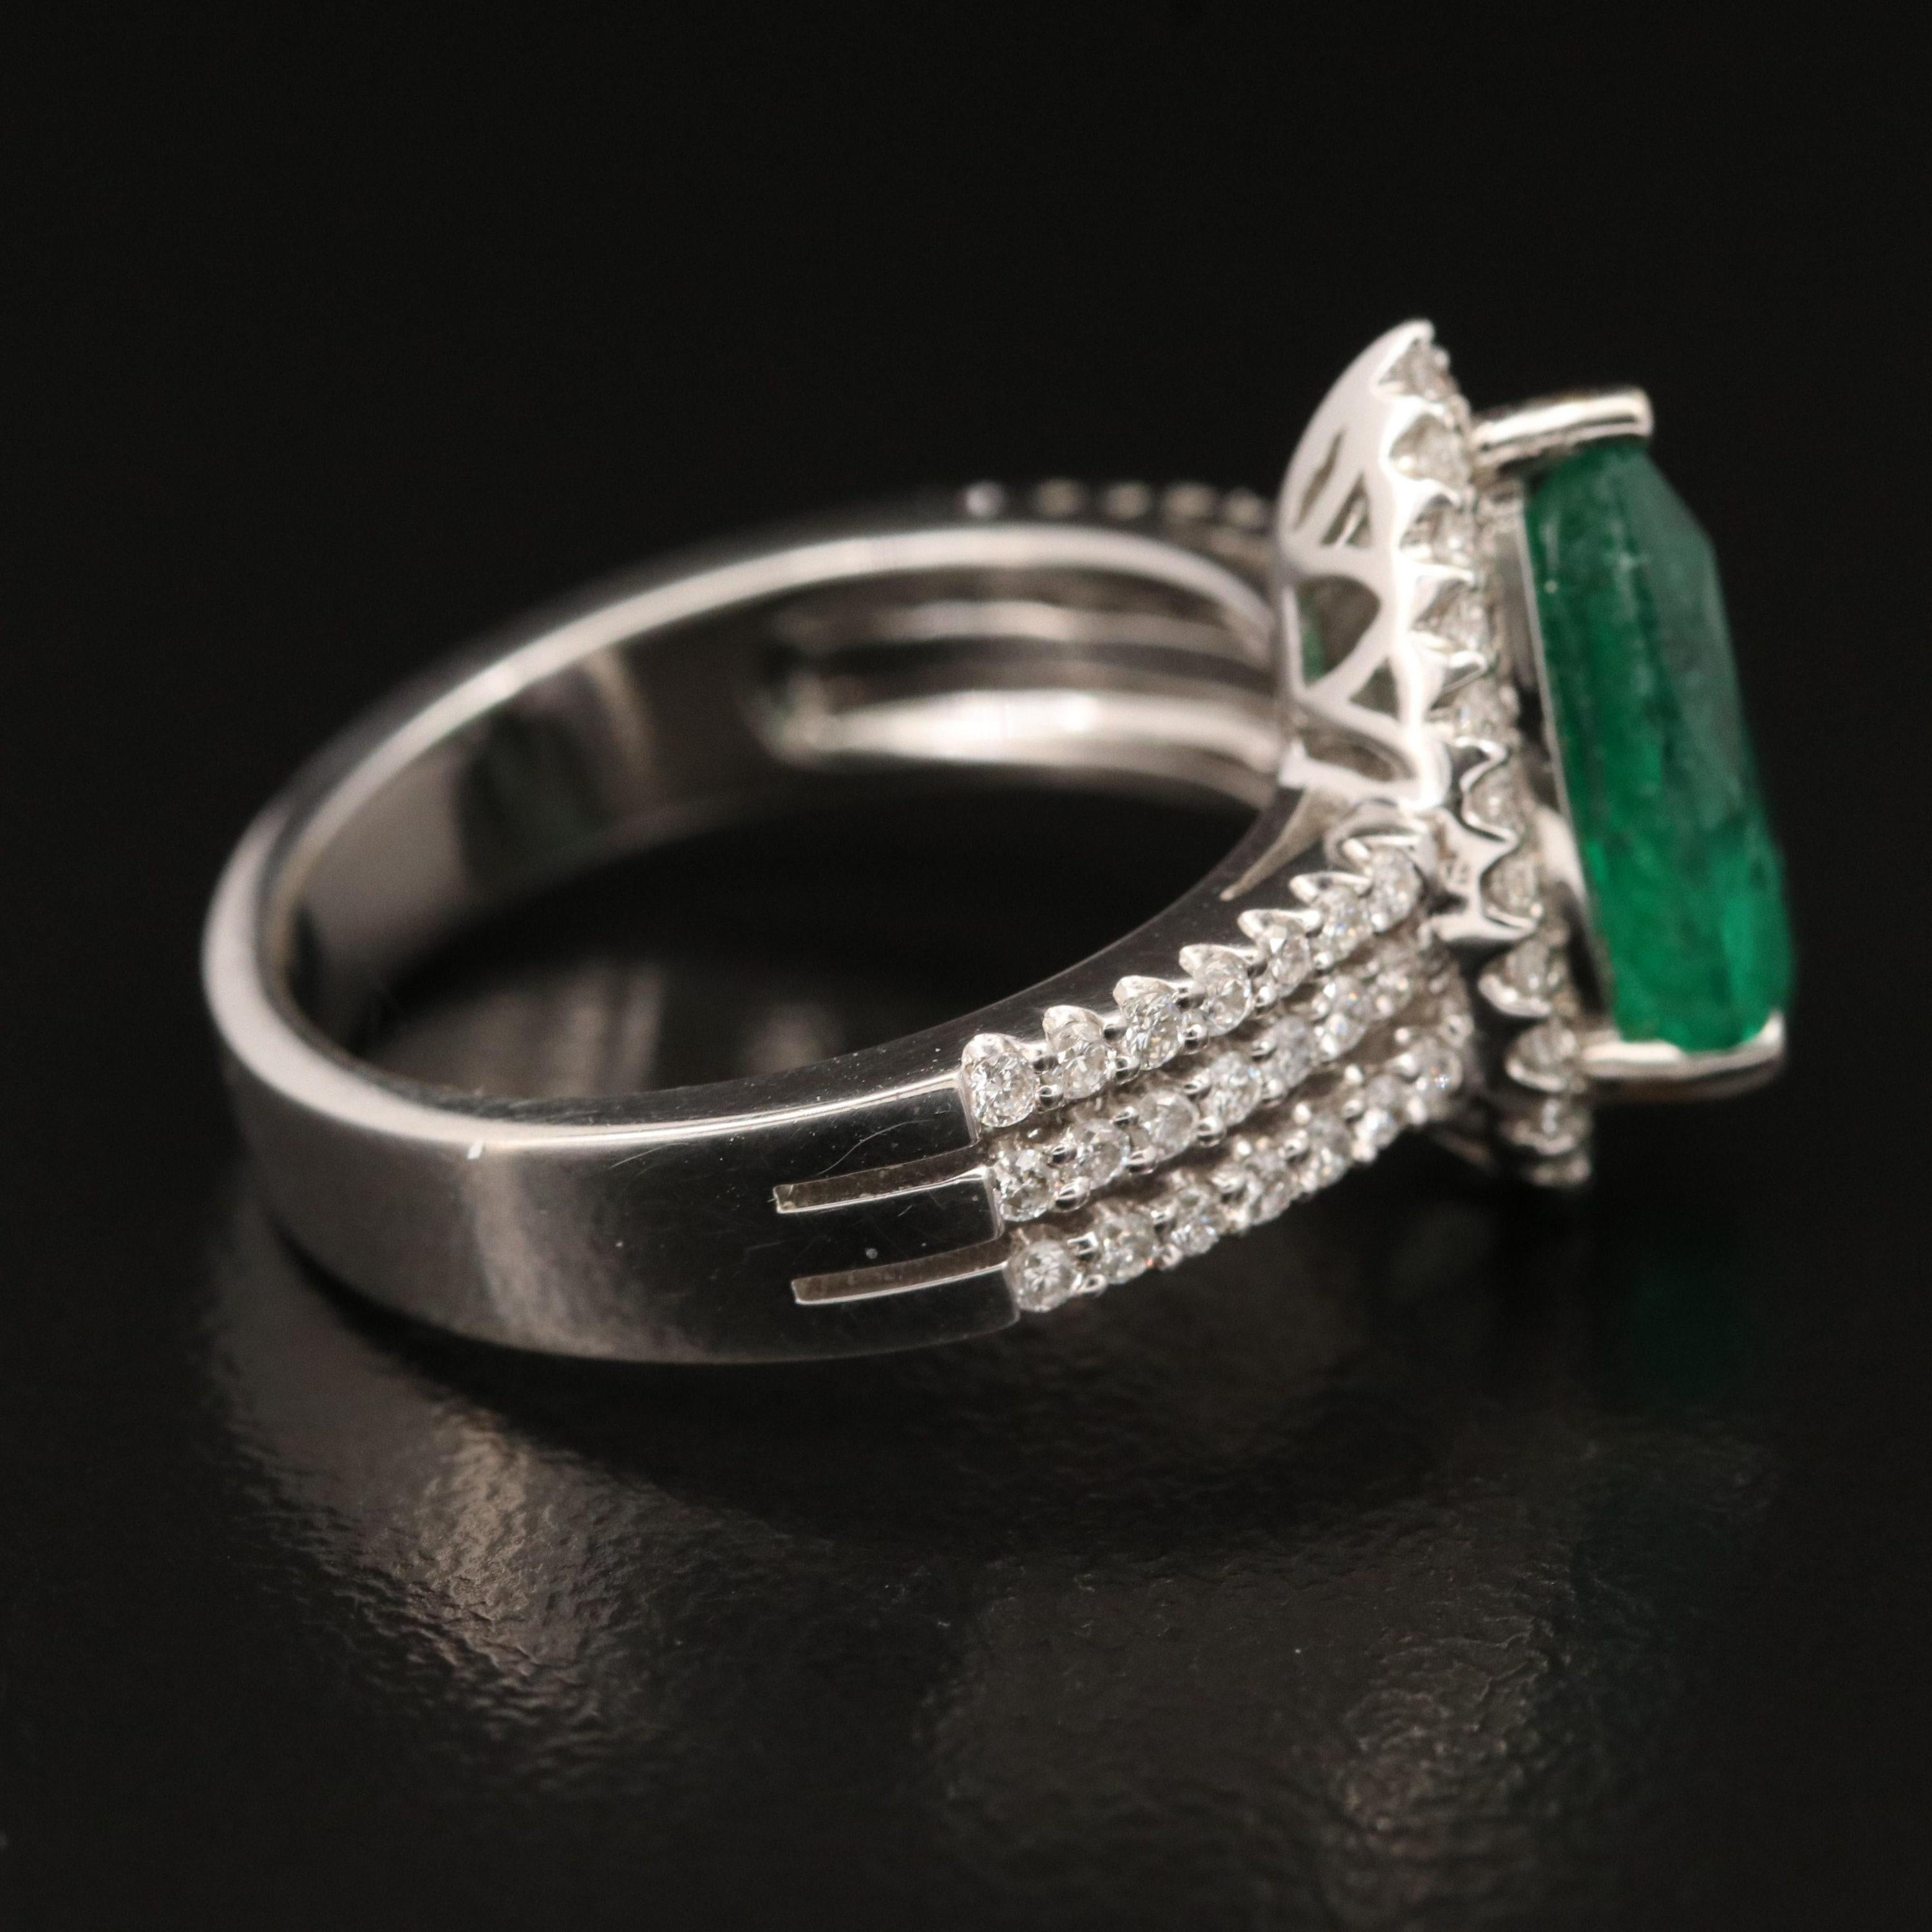 For Sale:  Certified 2.2 Carat Emerald and Diamond White Gold Engagement Ring Cocktail Ring 2